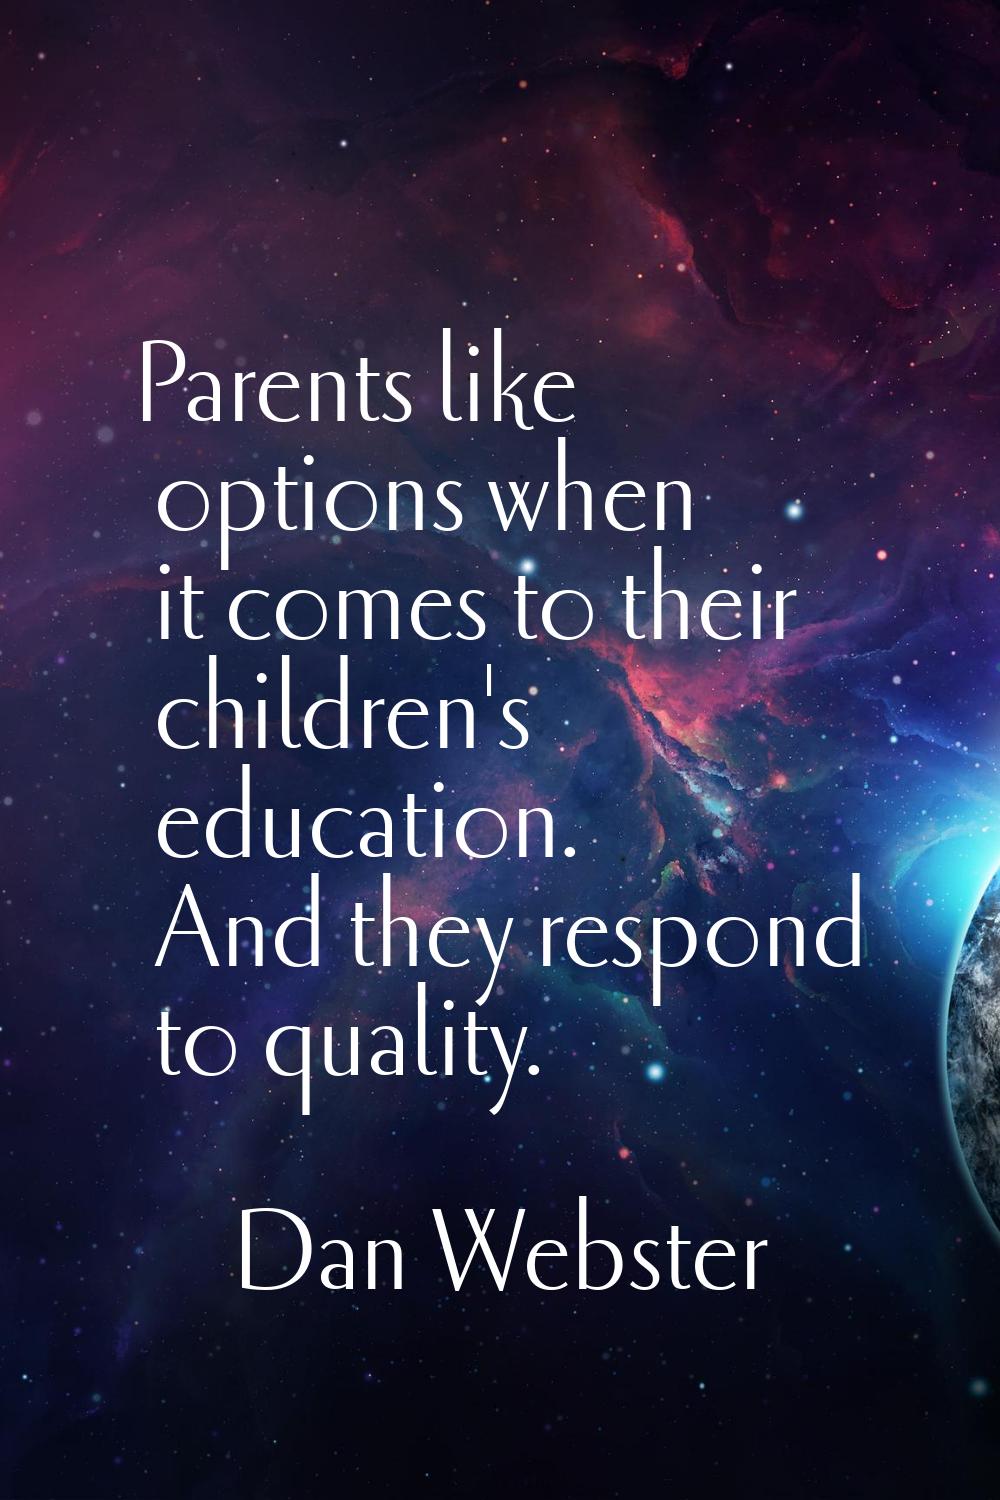 Parents like options when it comes to their children's education. And they respond to quality.